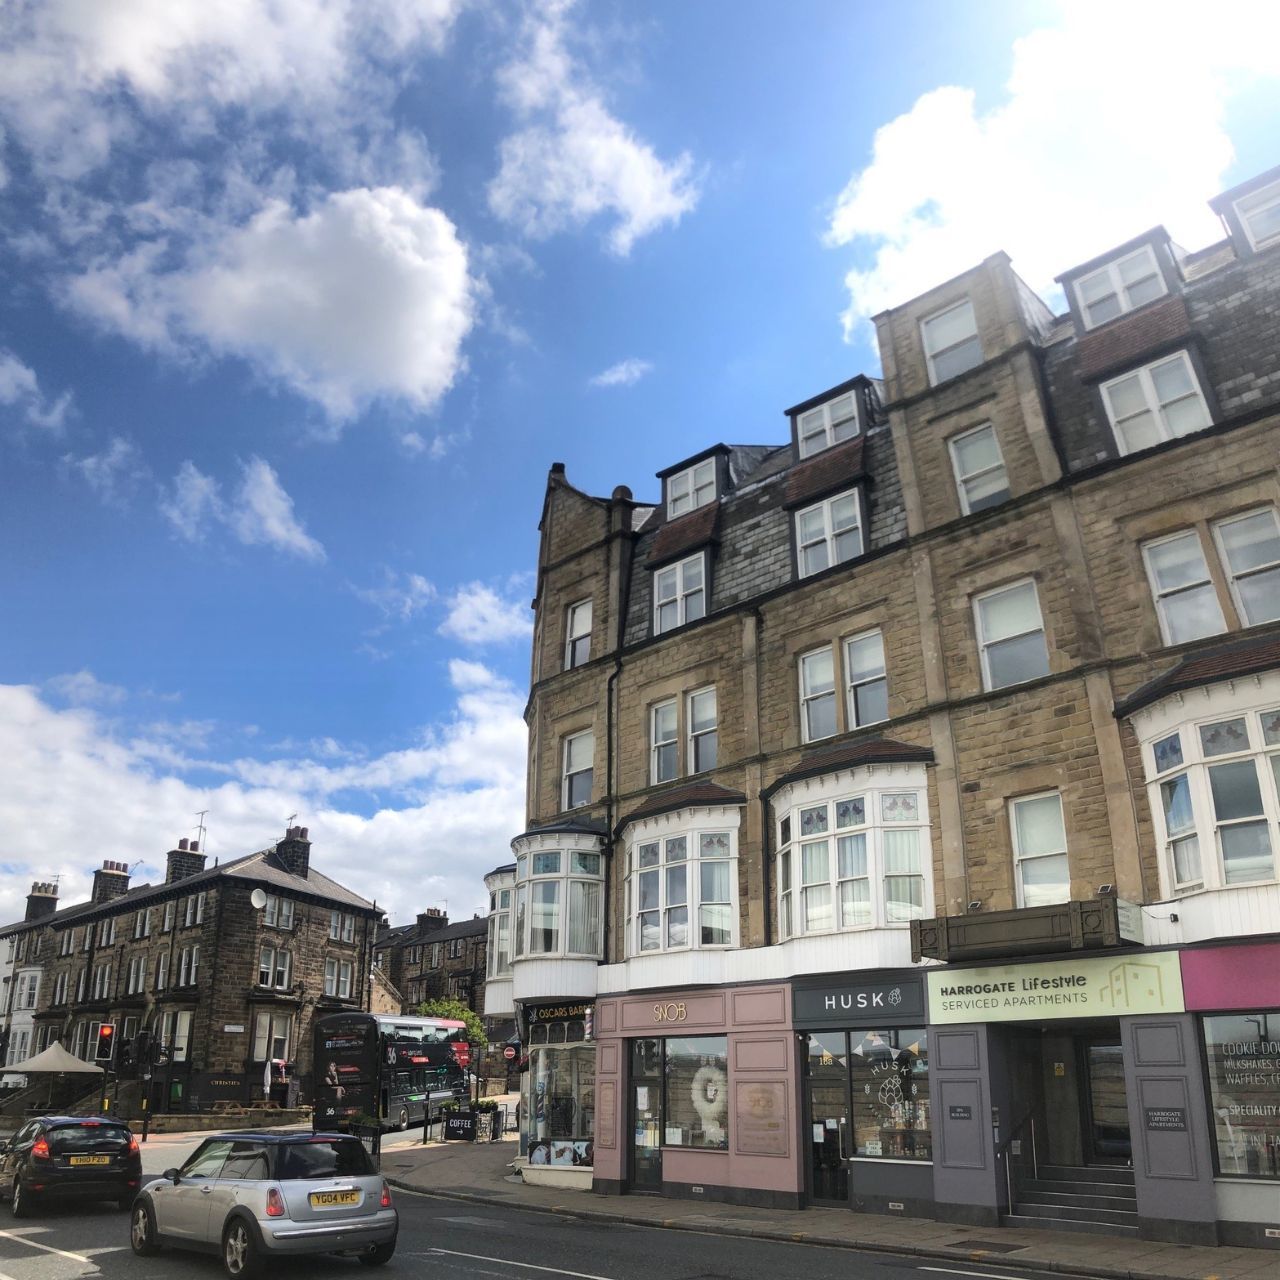 Harrogate Lifestyle Luxury Serviced Apartments property building entrance 18 Kings Road 18 Spa Building